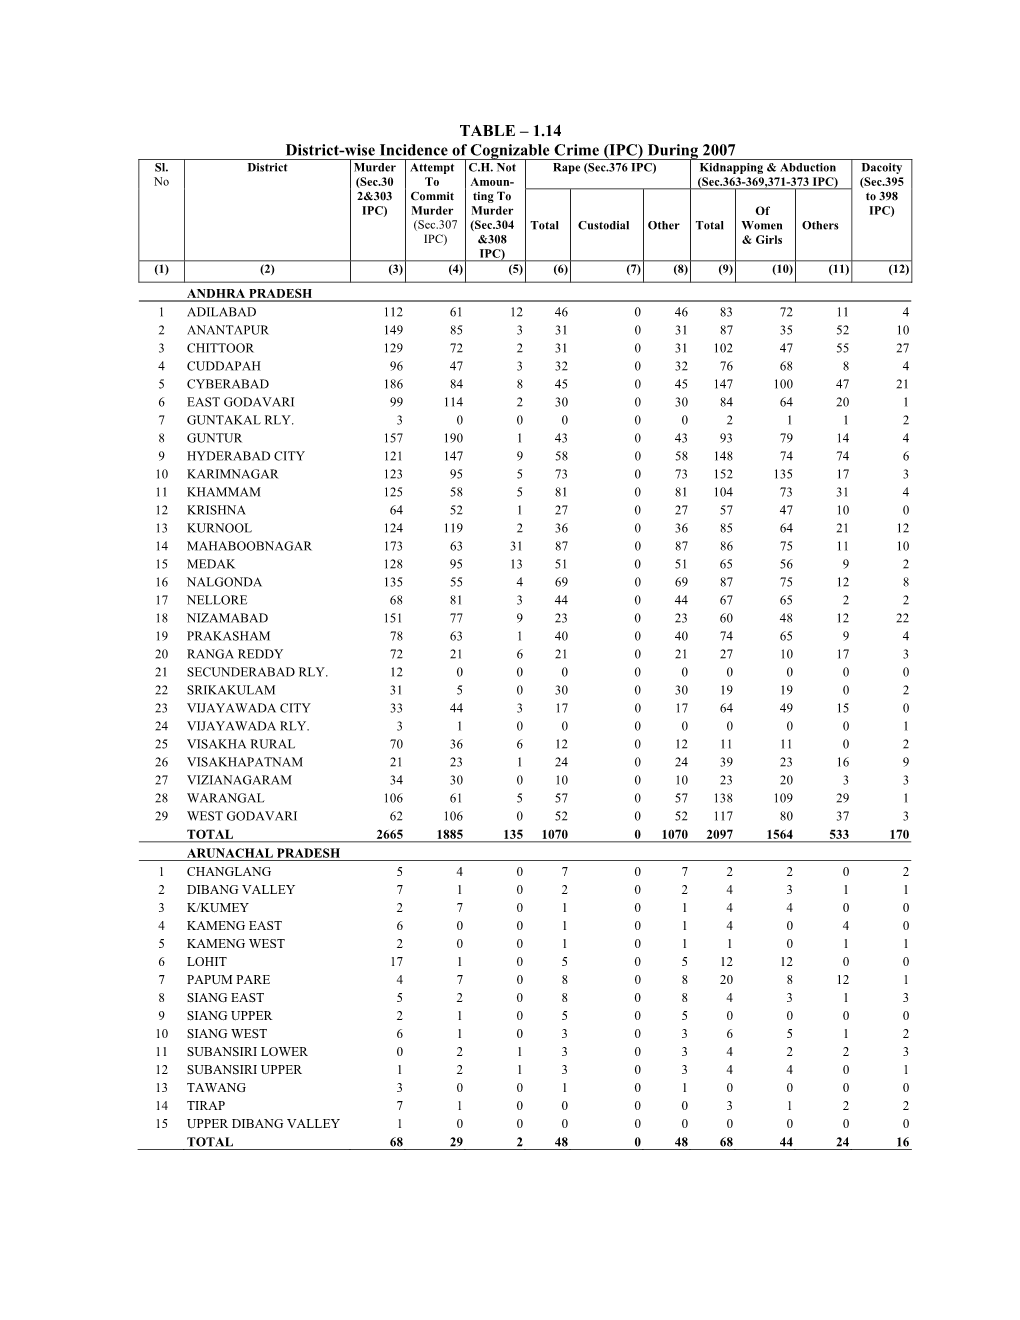 District-Wise Incidence of Cognizable Crimes (IPC) During 2007 Sl